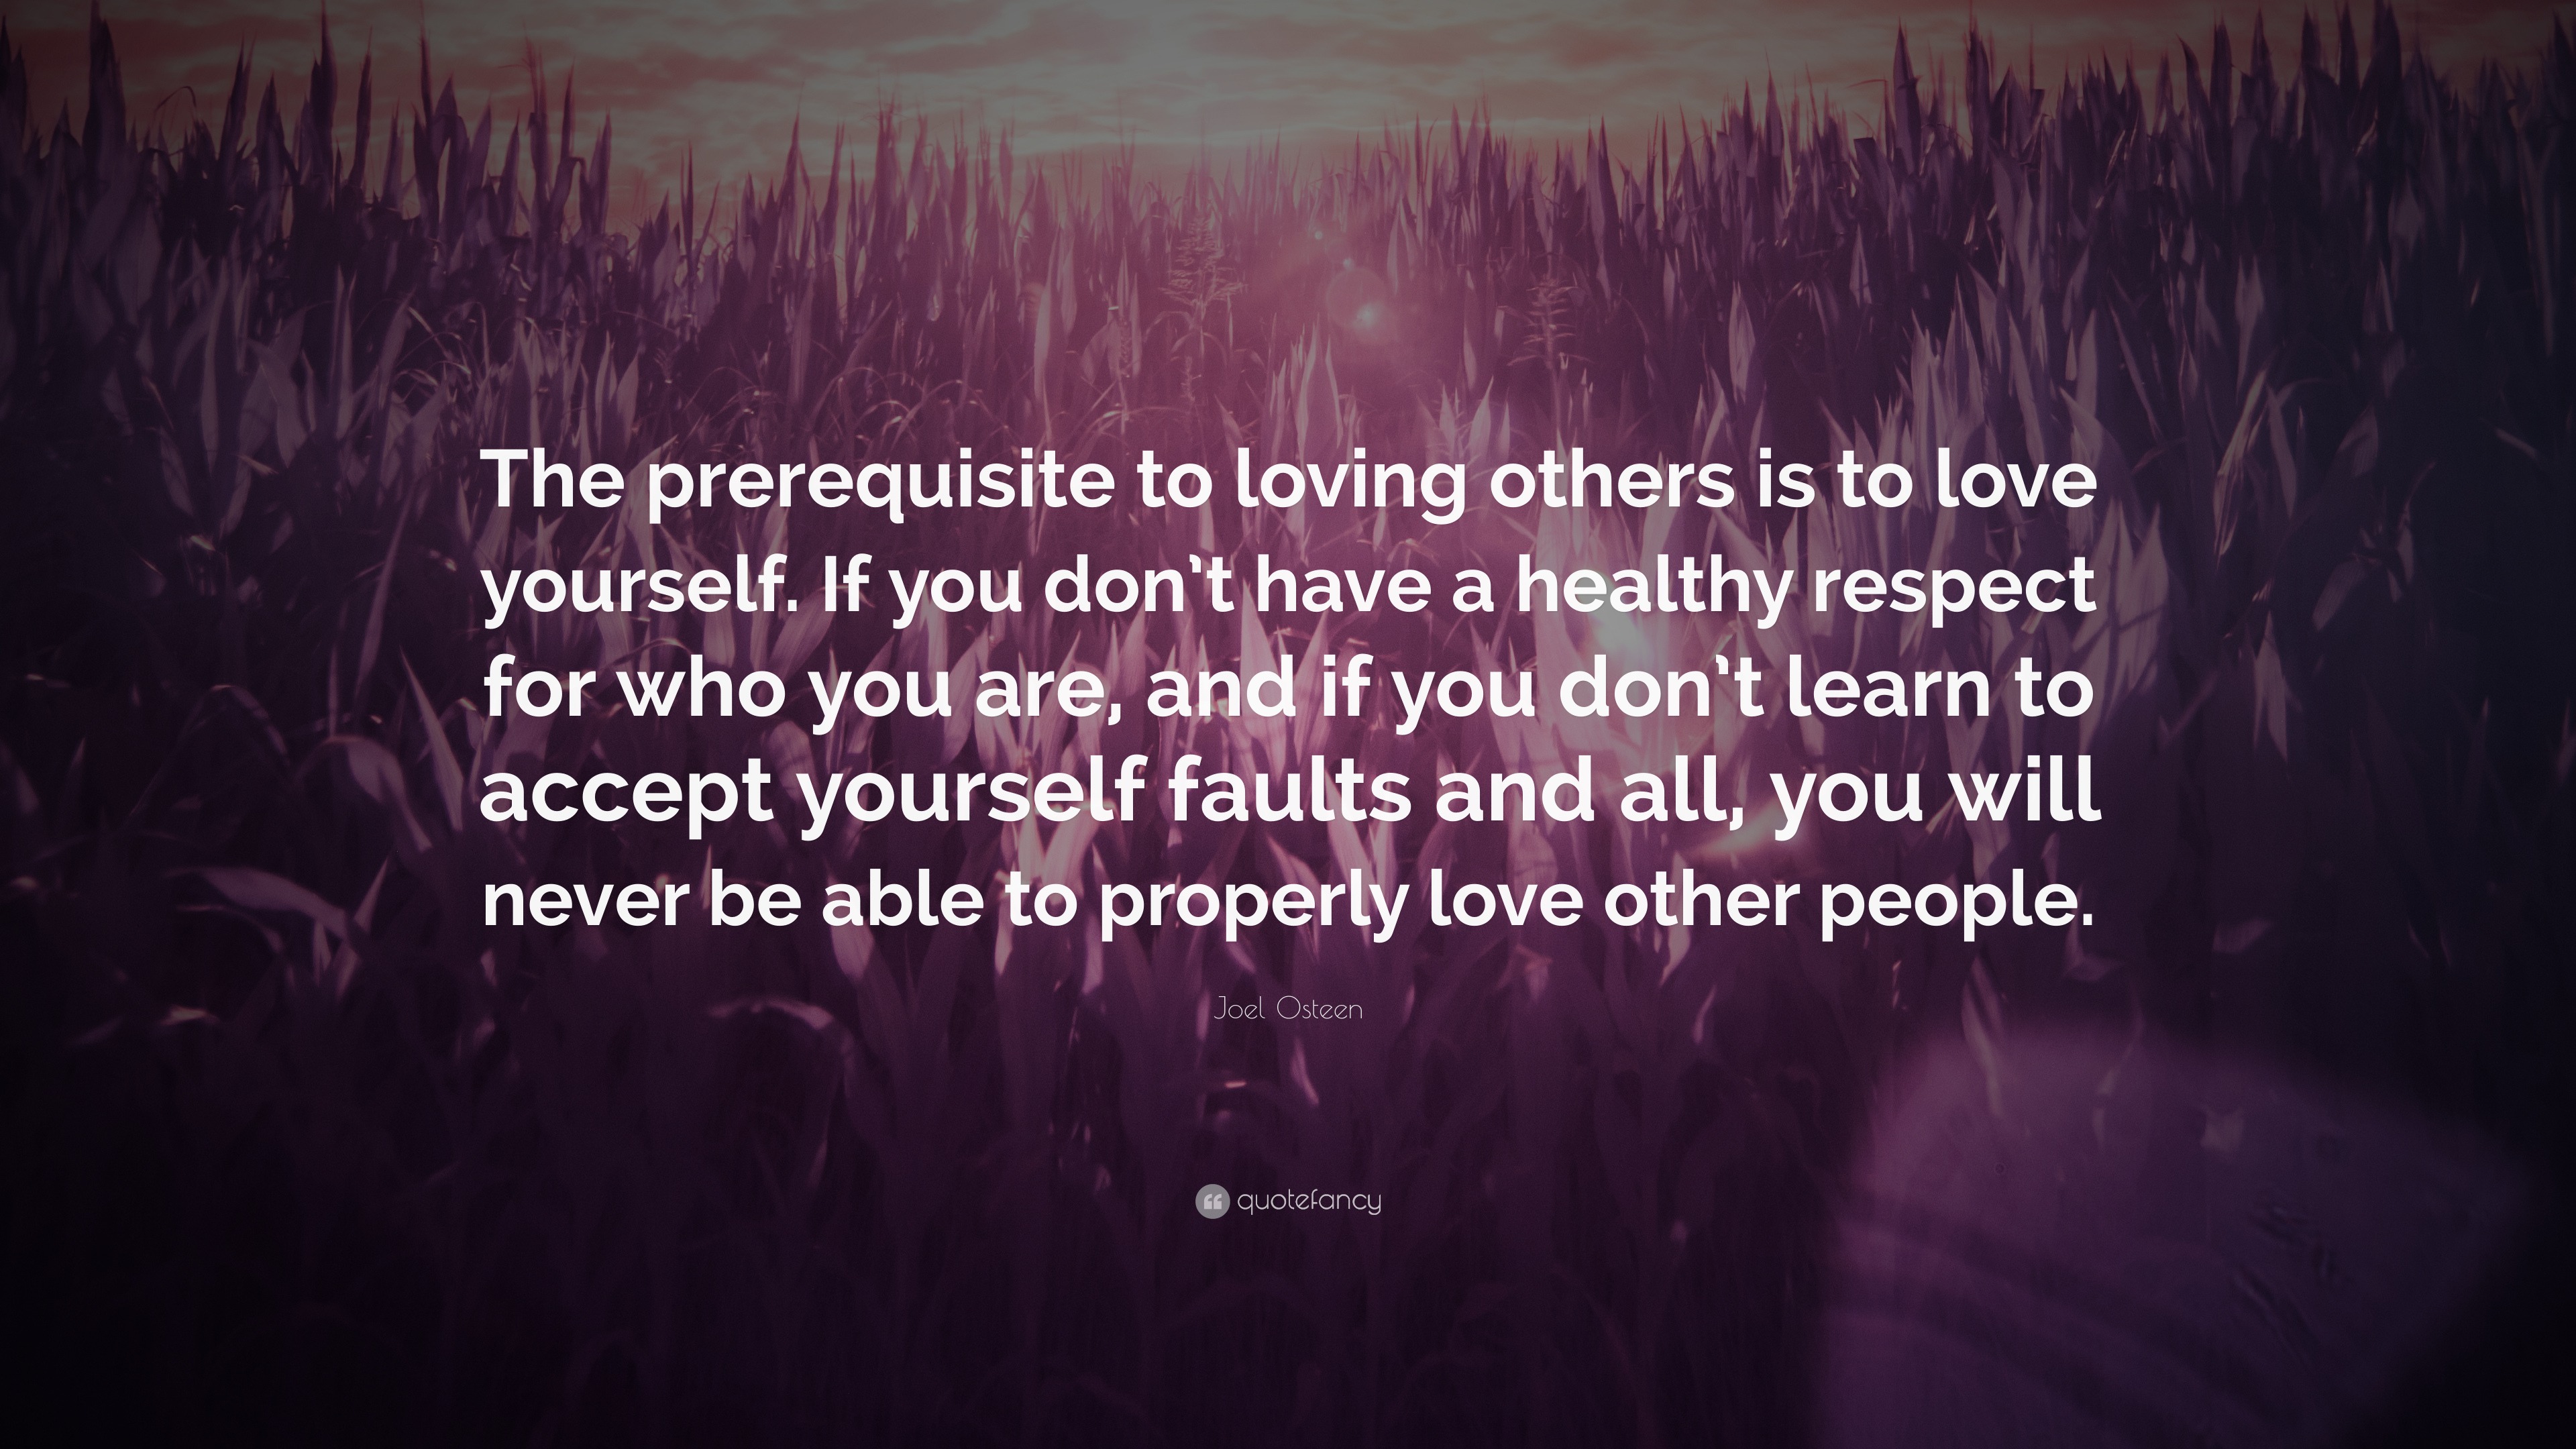 Joel Osteen Quote “the Prerequisite To Loving Others Is To Love Yourself If You Don T Have A